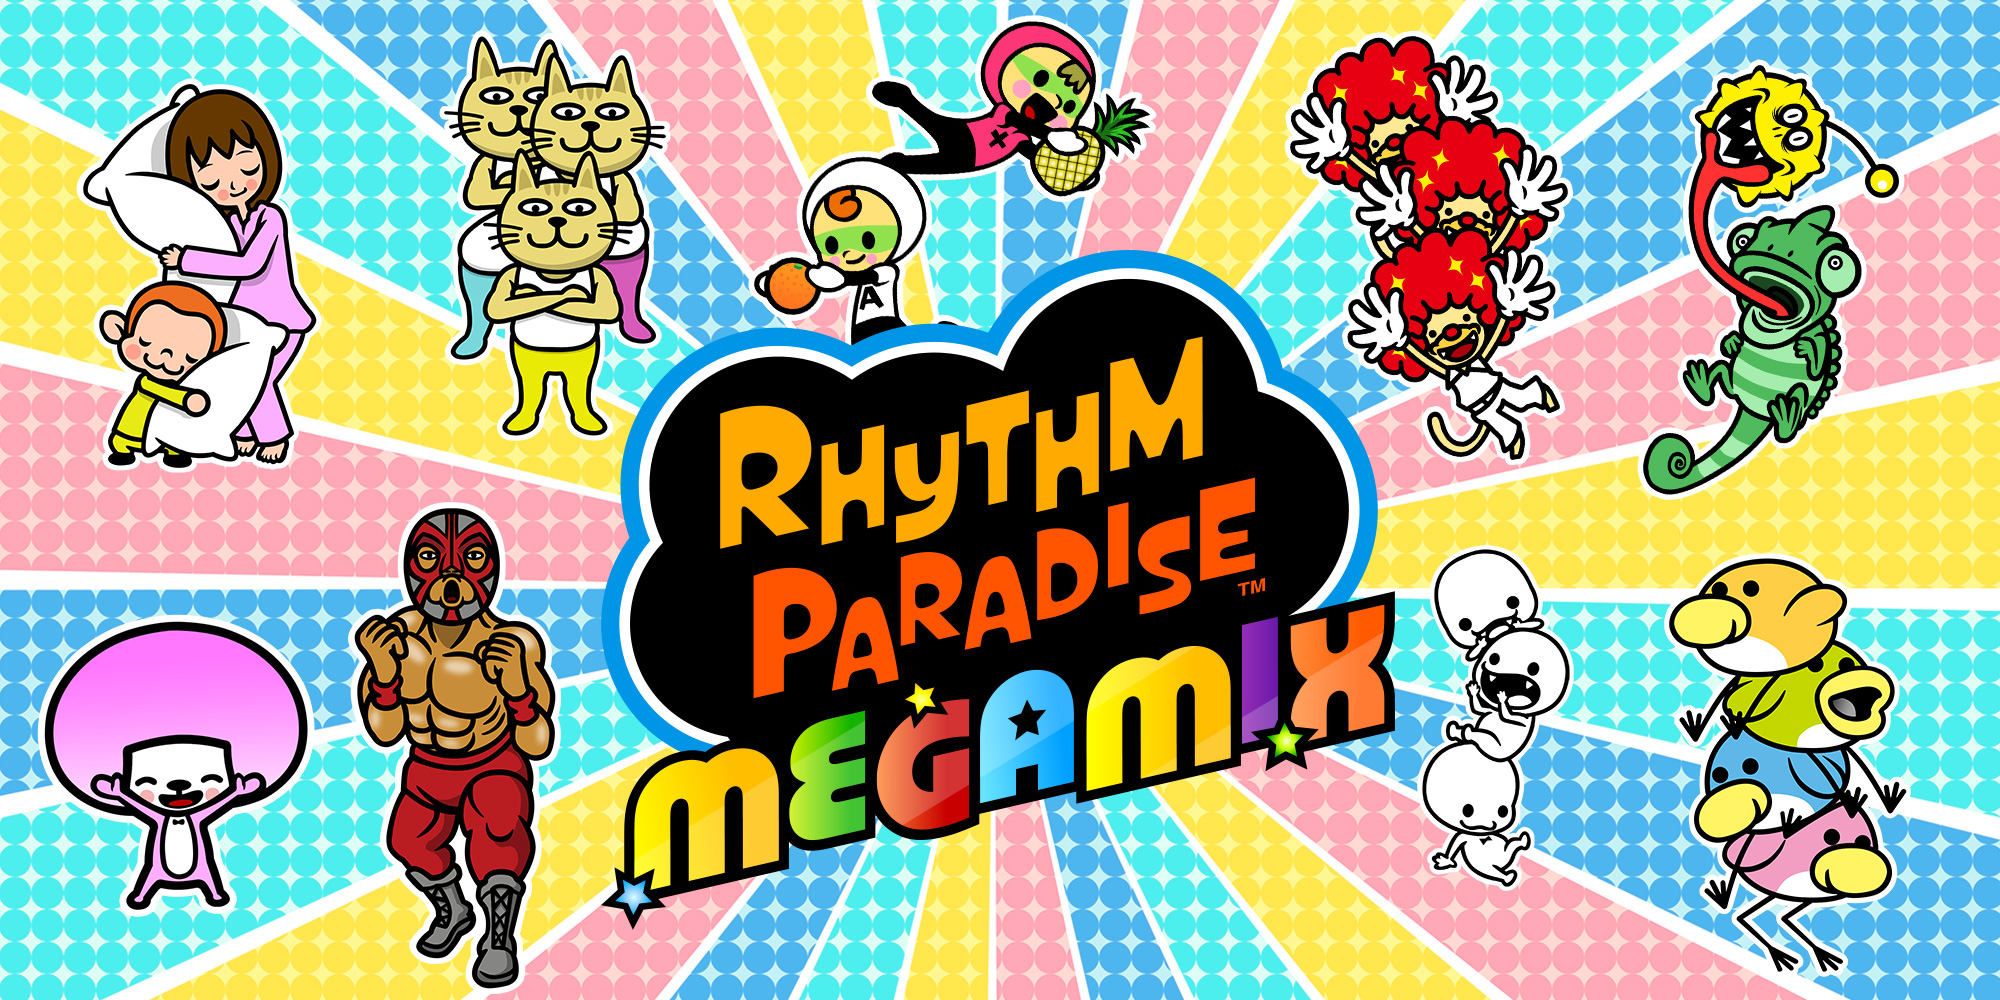 Official(?) Nintendo Consoles Music Thread v2.0 - Page 8 SI_3DS_RhythmParadiseMegamix